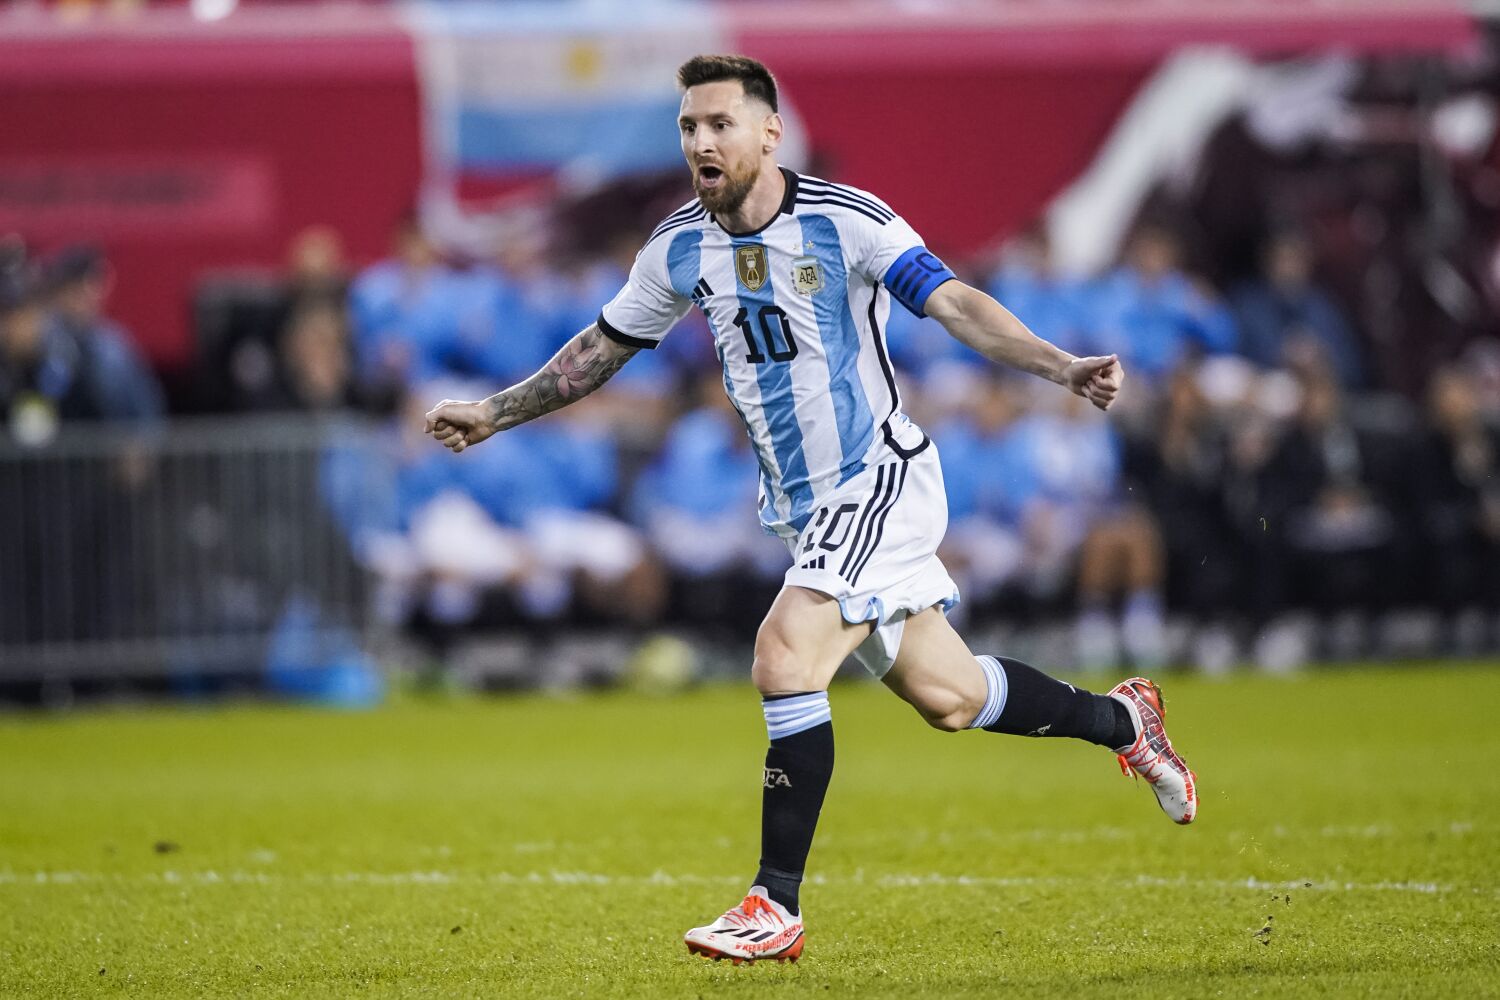 Column: Lionel Messi may not be MLS' answer to reach mainstream